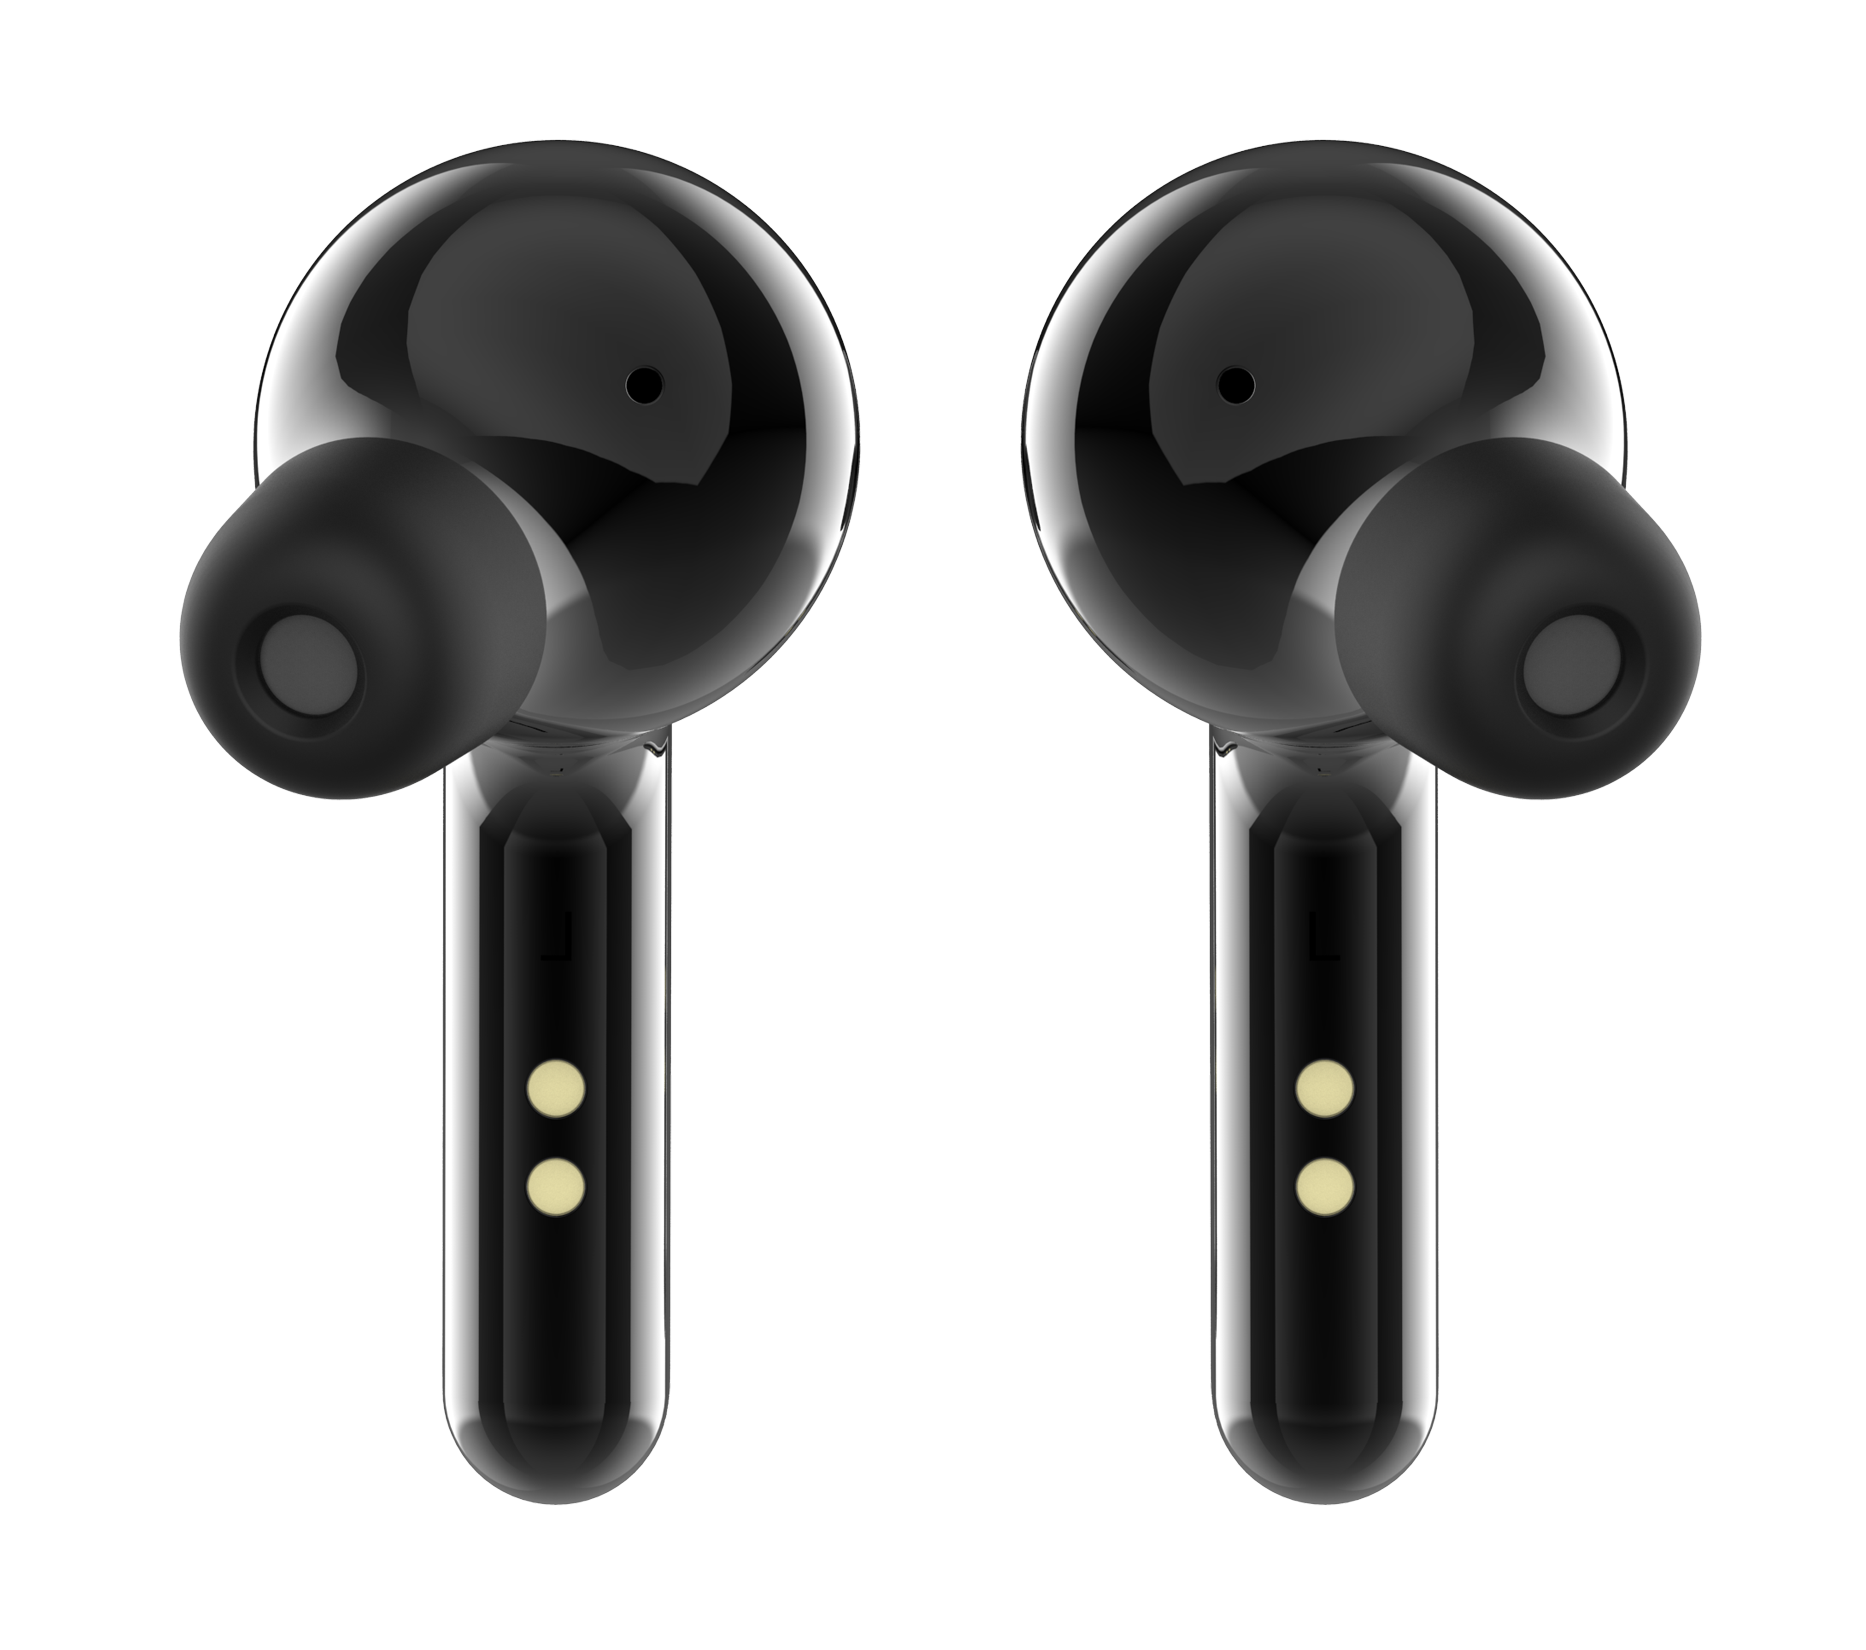 Mobvoi head back to their crowdfunding origins with the Mobvoi Earbuds ...